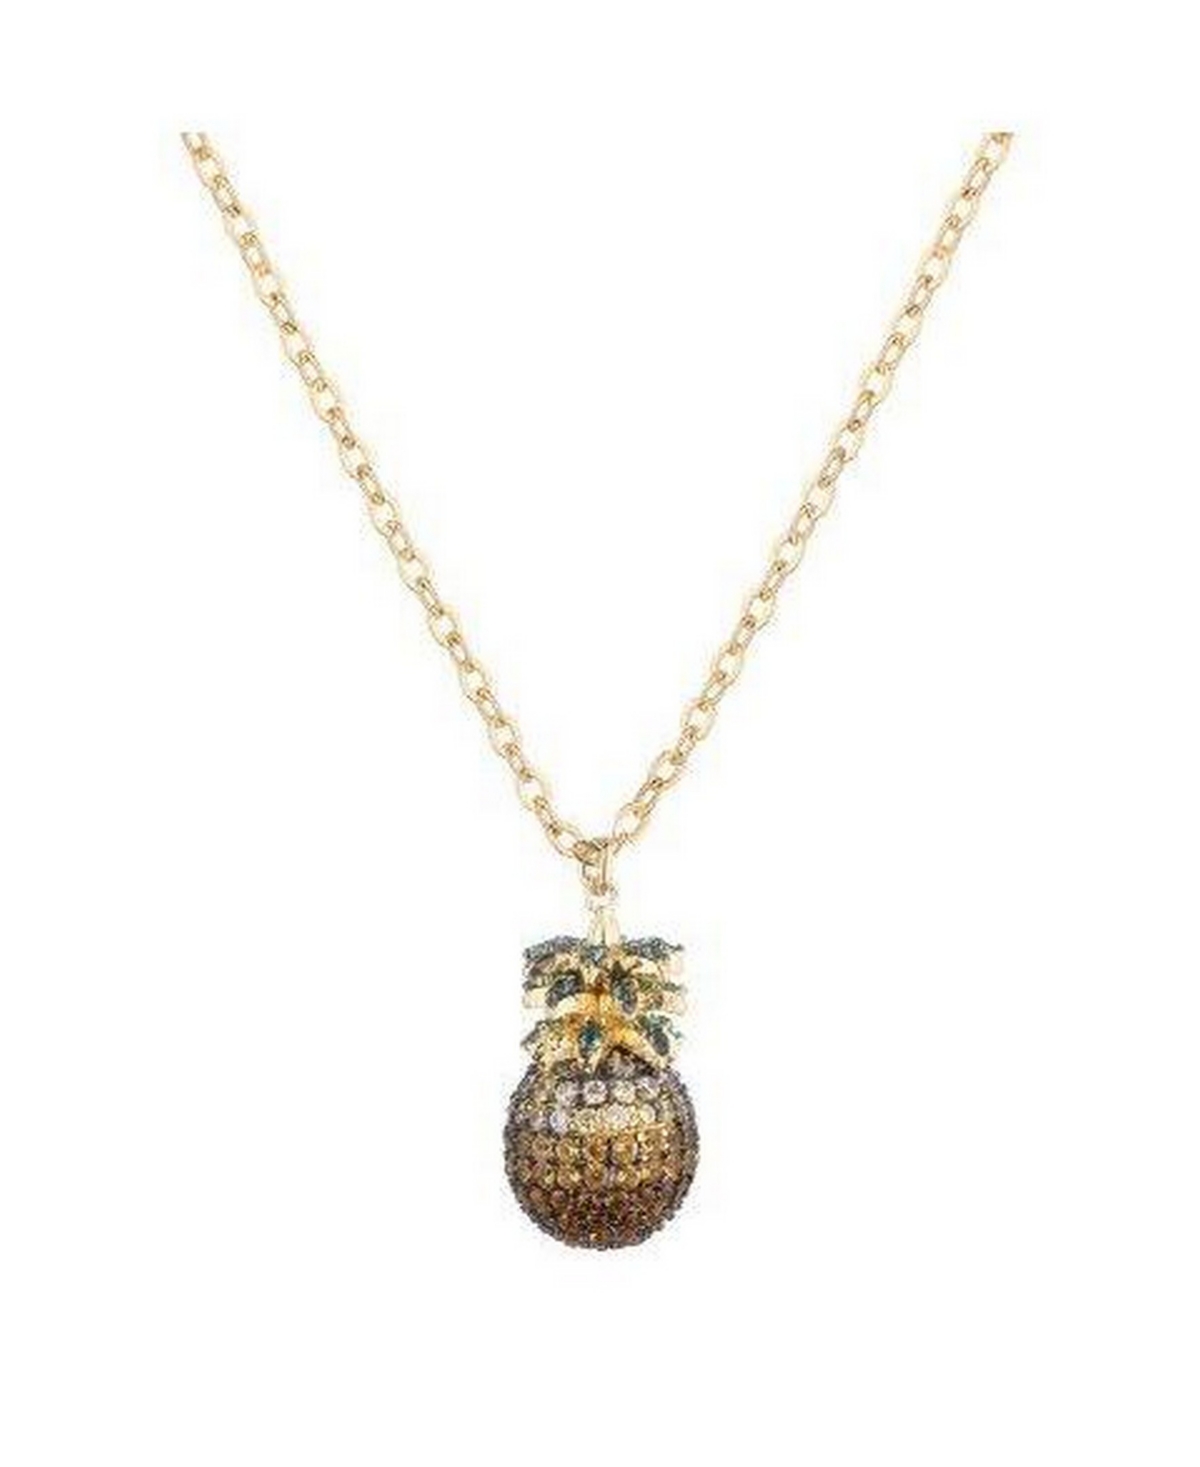 Cubic Zirconia Pineapple Necklace - Gold